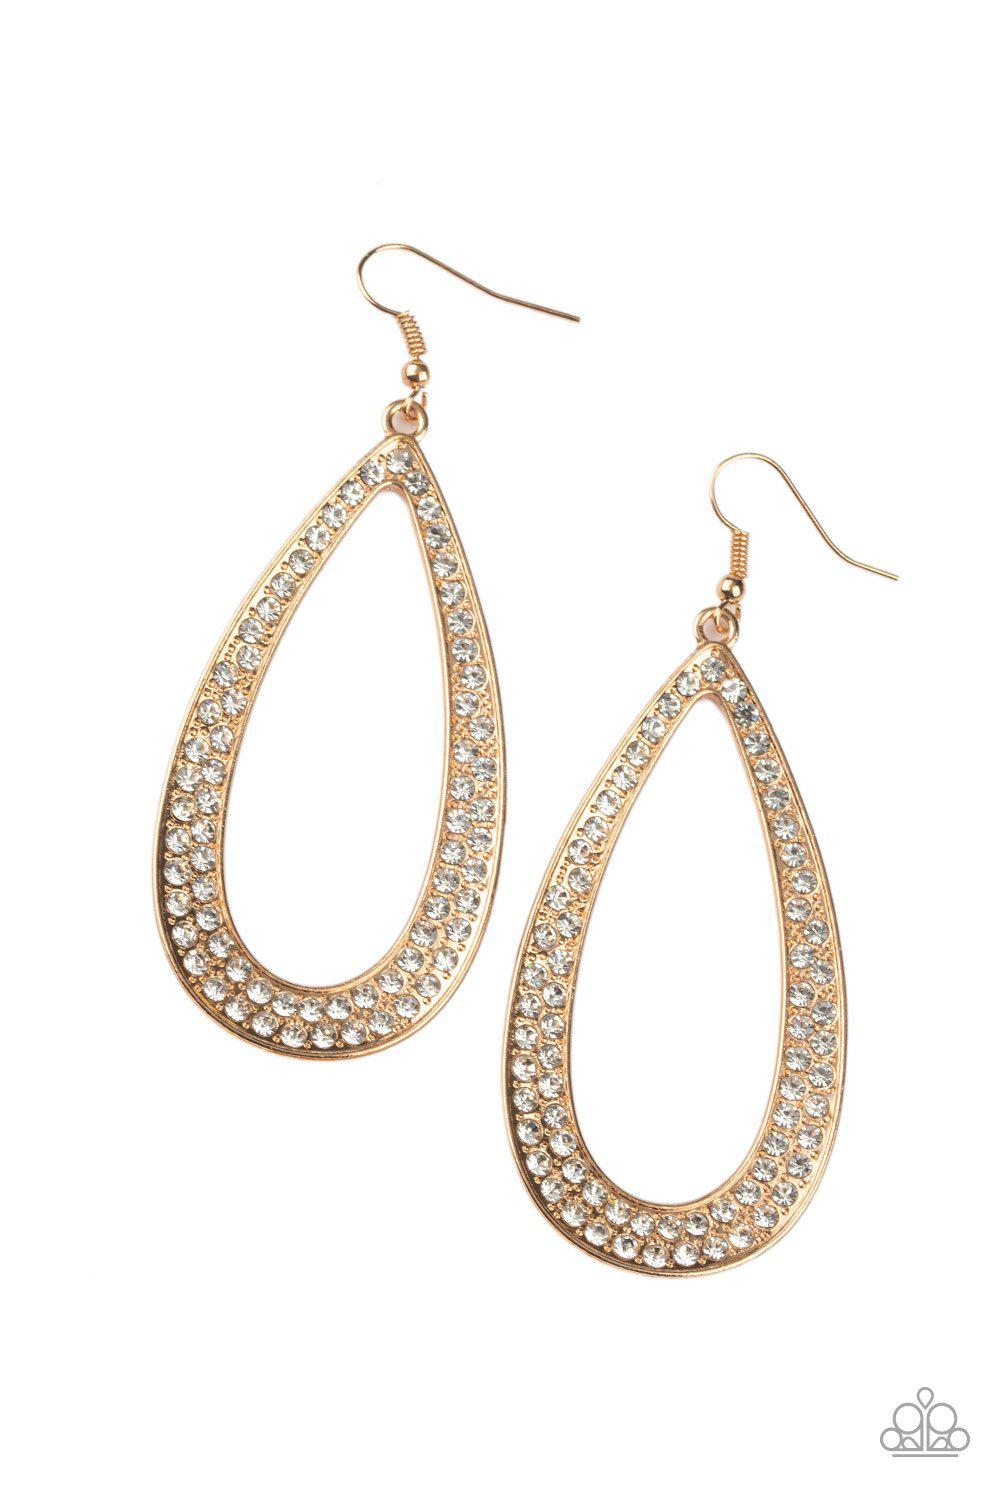 Diamond Distraction Gold and White Rhinestone Teardrop Earrings - Paparazzi Accessories-CarasShop.com - $5 Jewelry by Cara Jewels